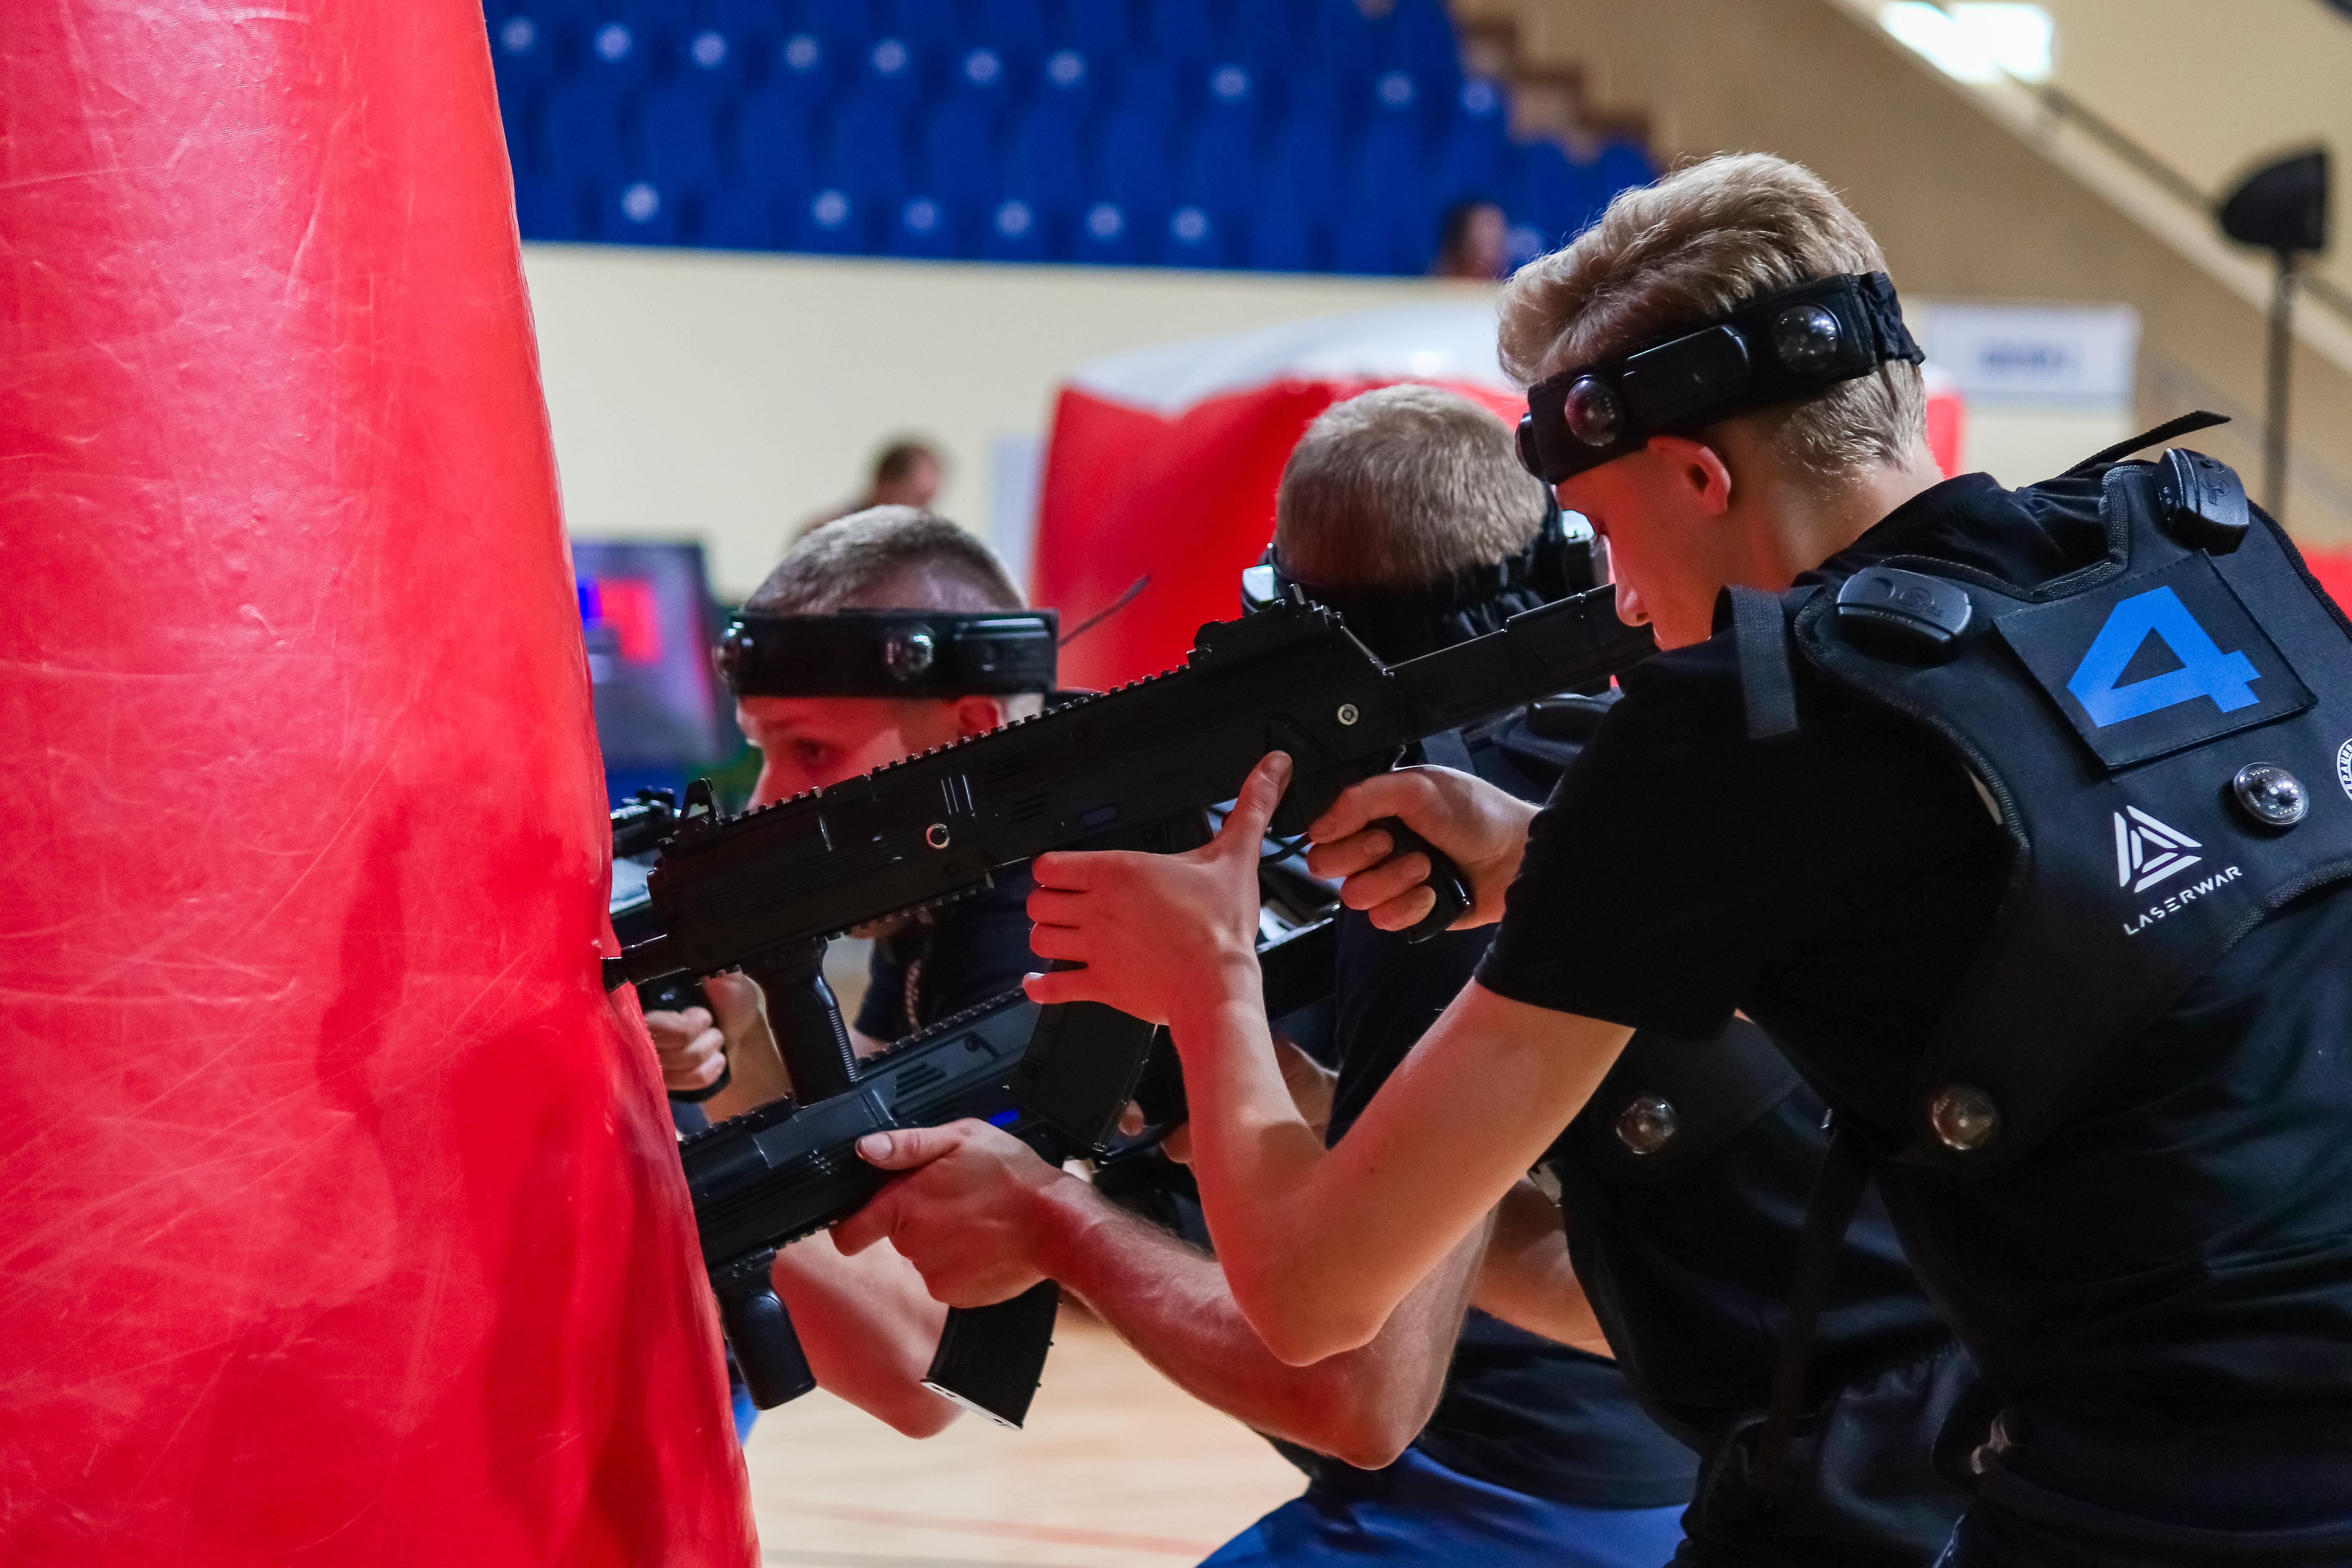 Organising a laser tag tournament at your club